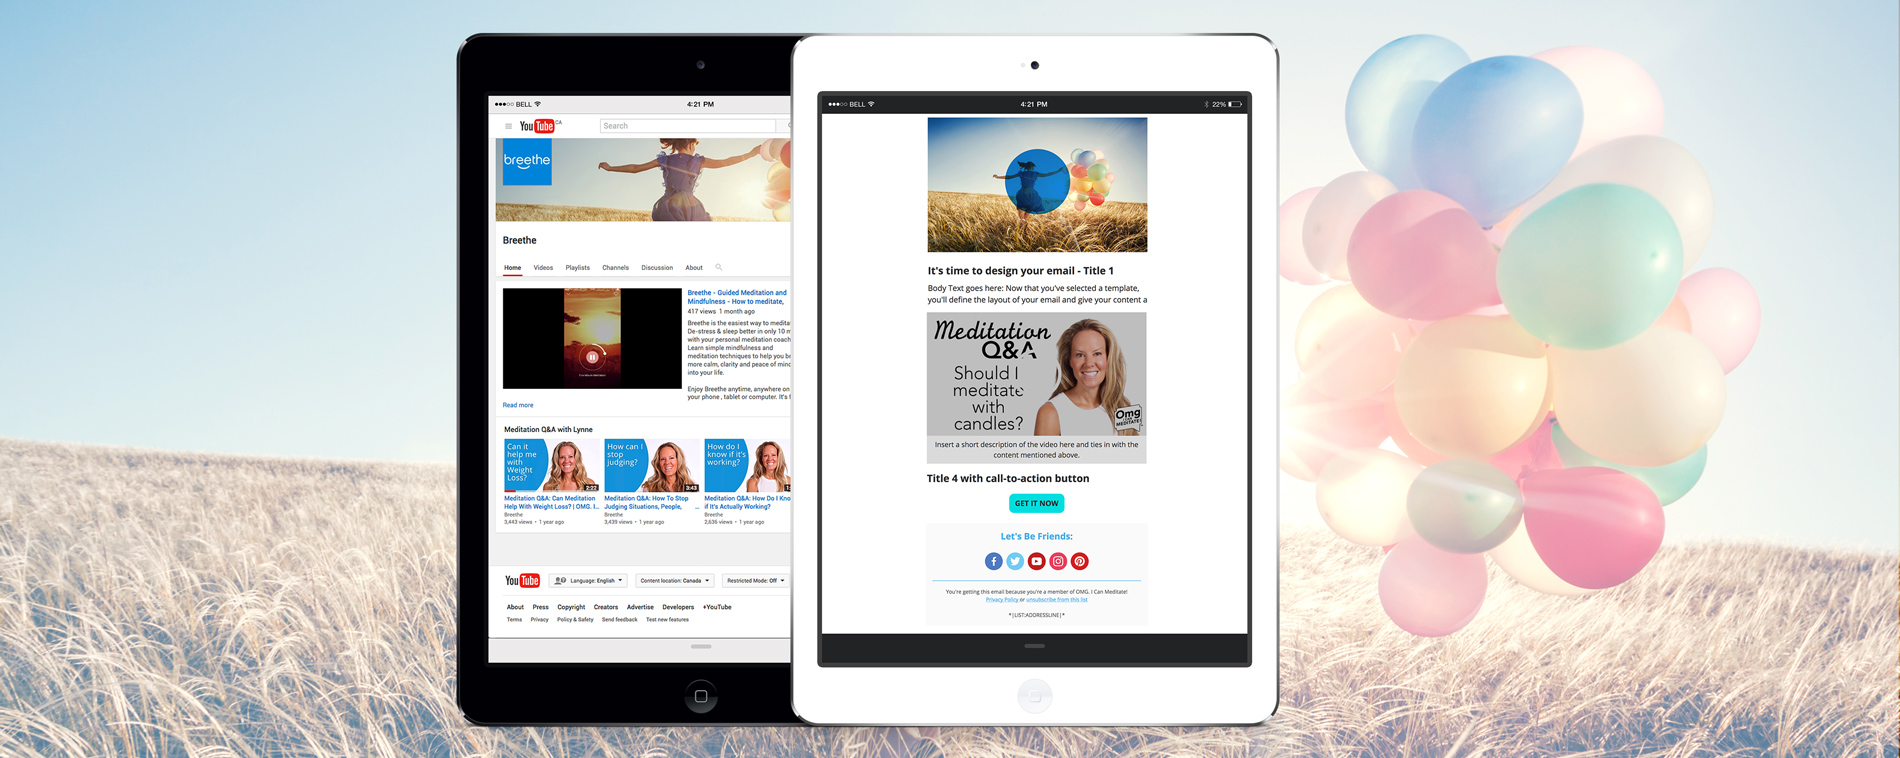 Portfolio display of Breethe meditation app branding designed on iPads with colorful baloons in an open field as background